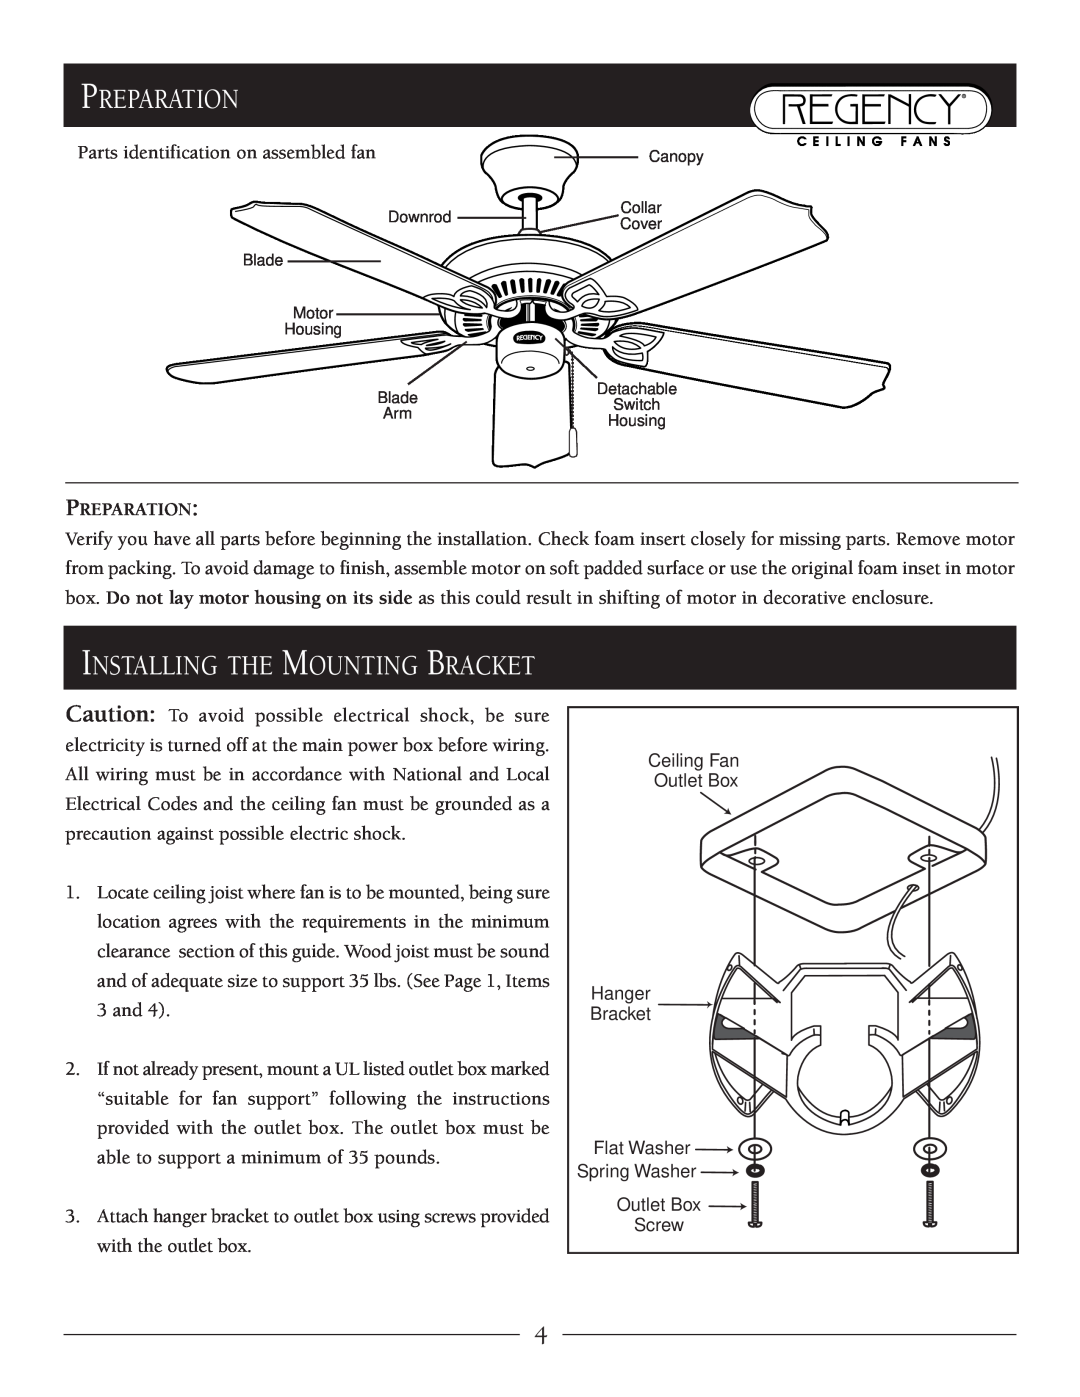 Marquis SERIES owner manual Preparation, Installing The Mounting Bracket 